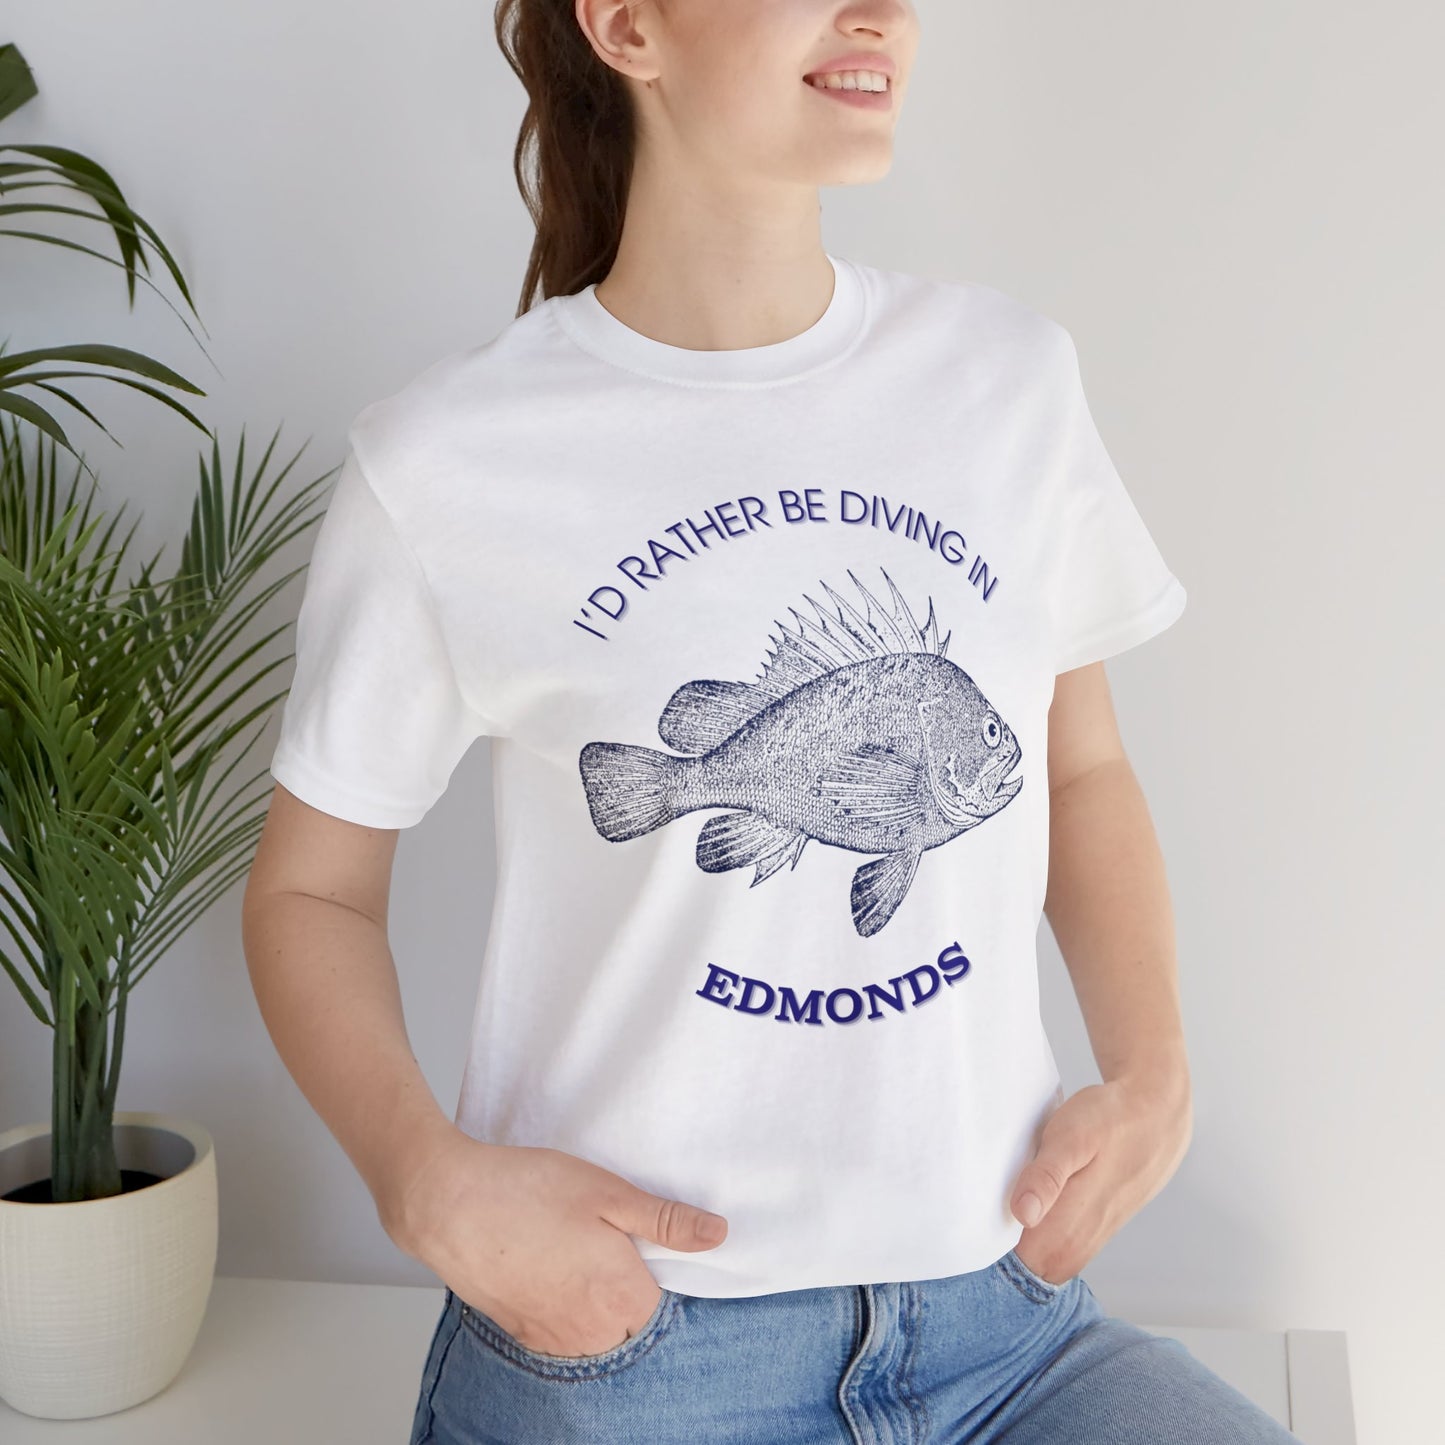 I'd Rather Be Diving in Edmonds T-shirt